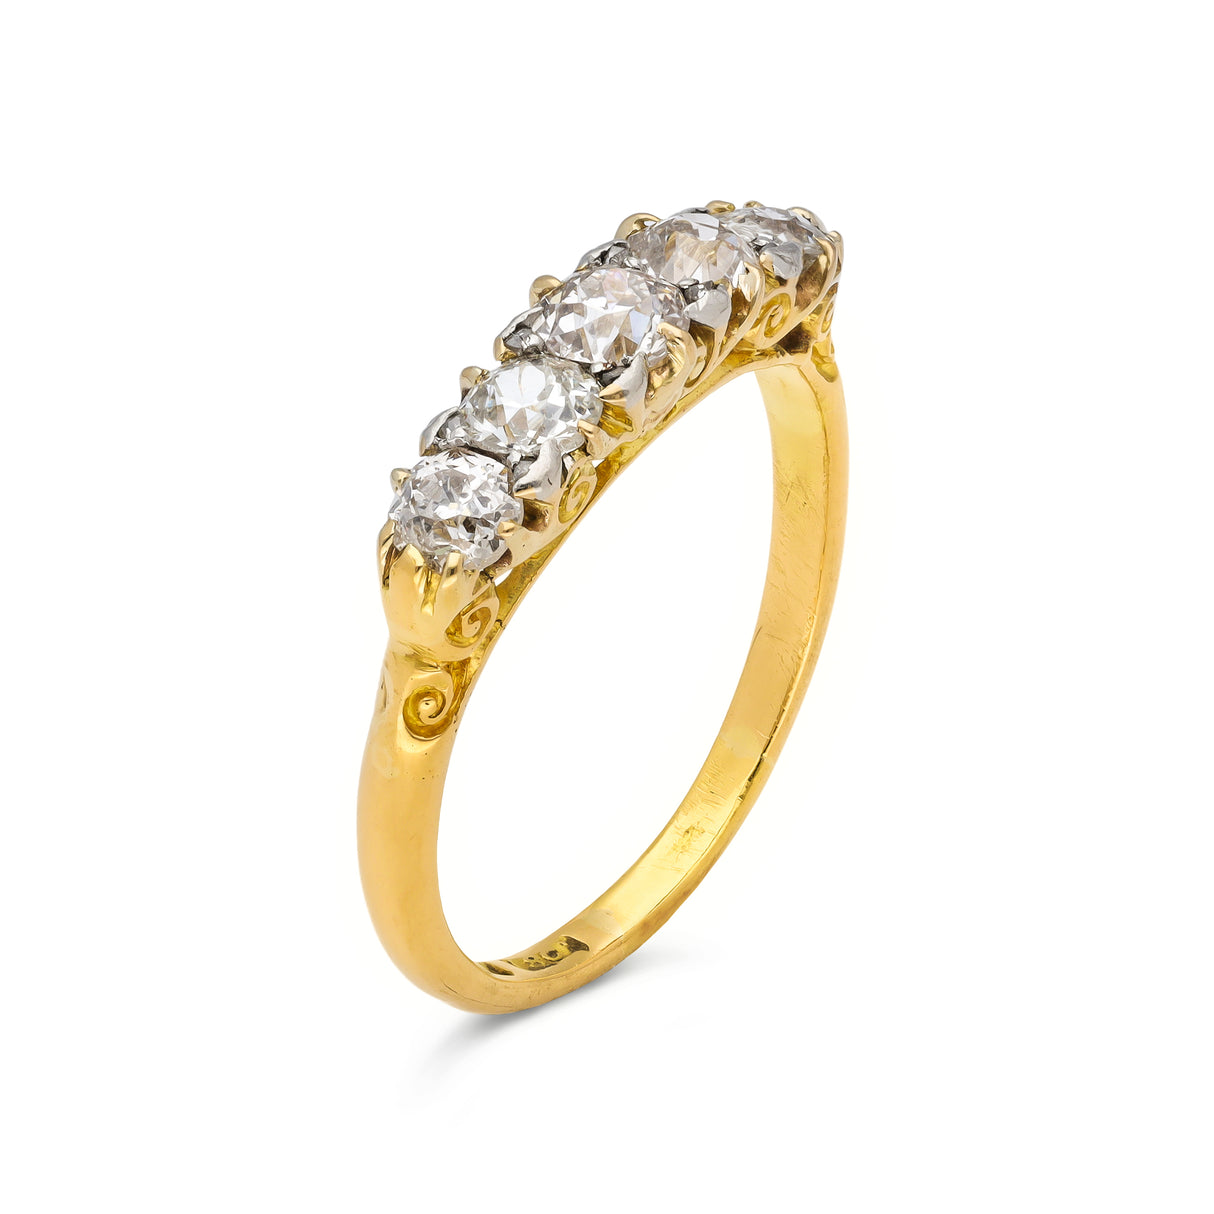 Antique Diamond Five Stone Engagement Ring, 18ct Yellow Gold